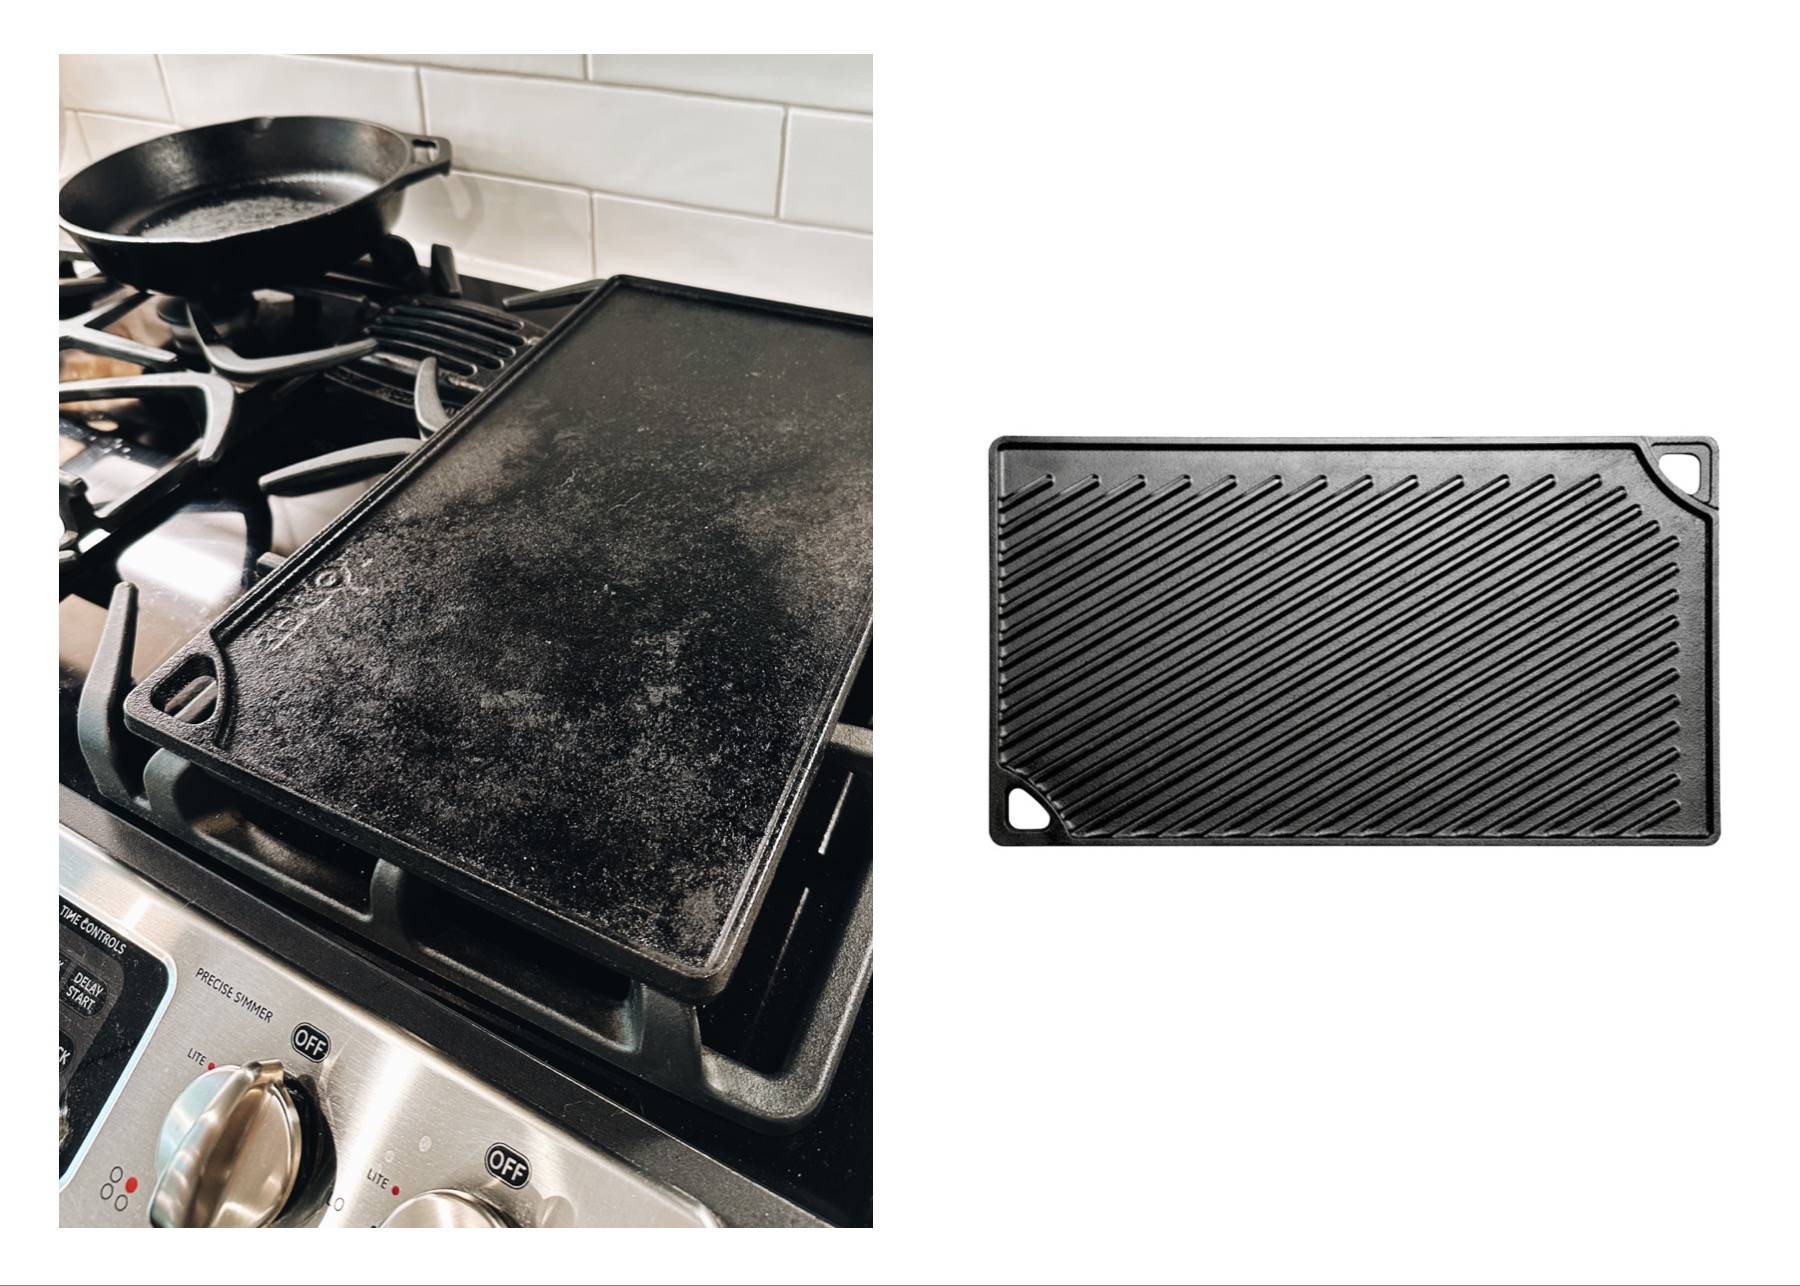 Cast iron griddle resting on a gas stovetop next to a stock photo of a cast iron griddle.